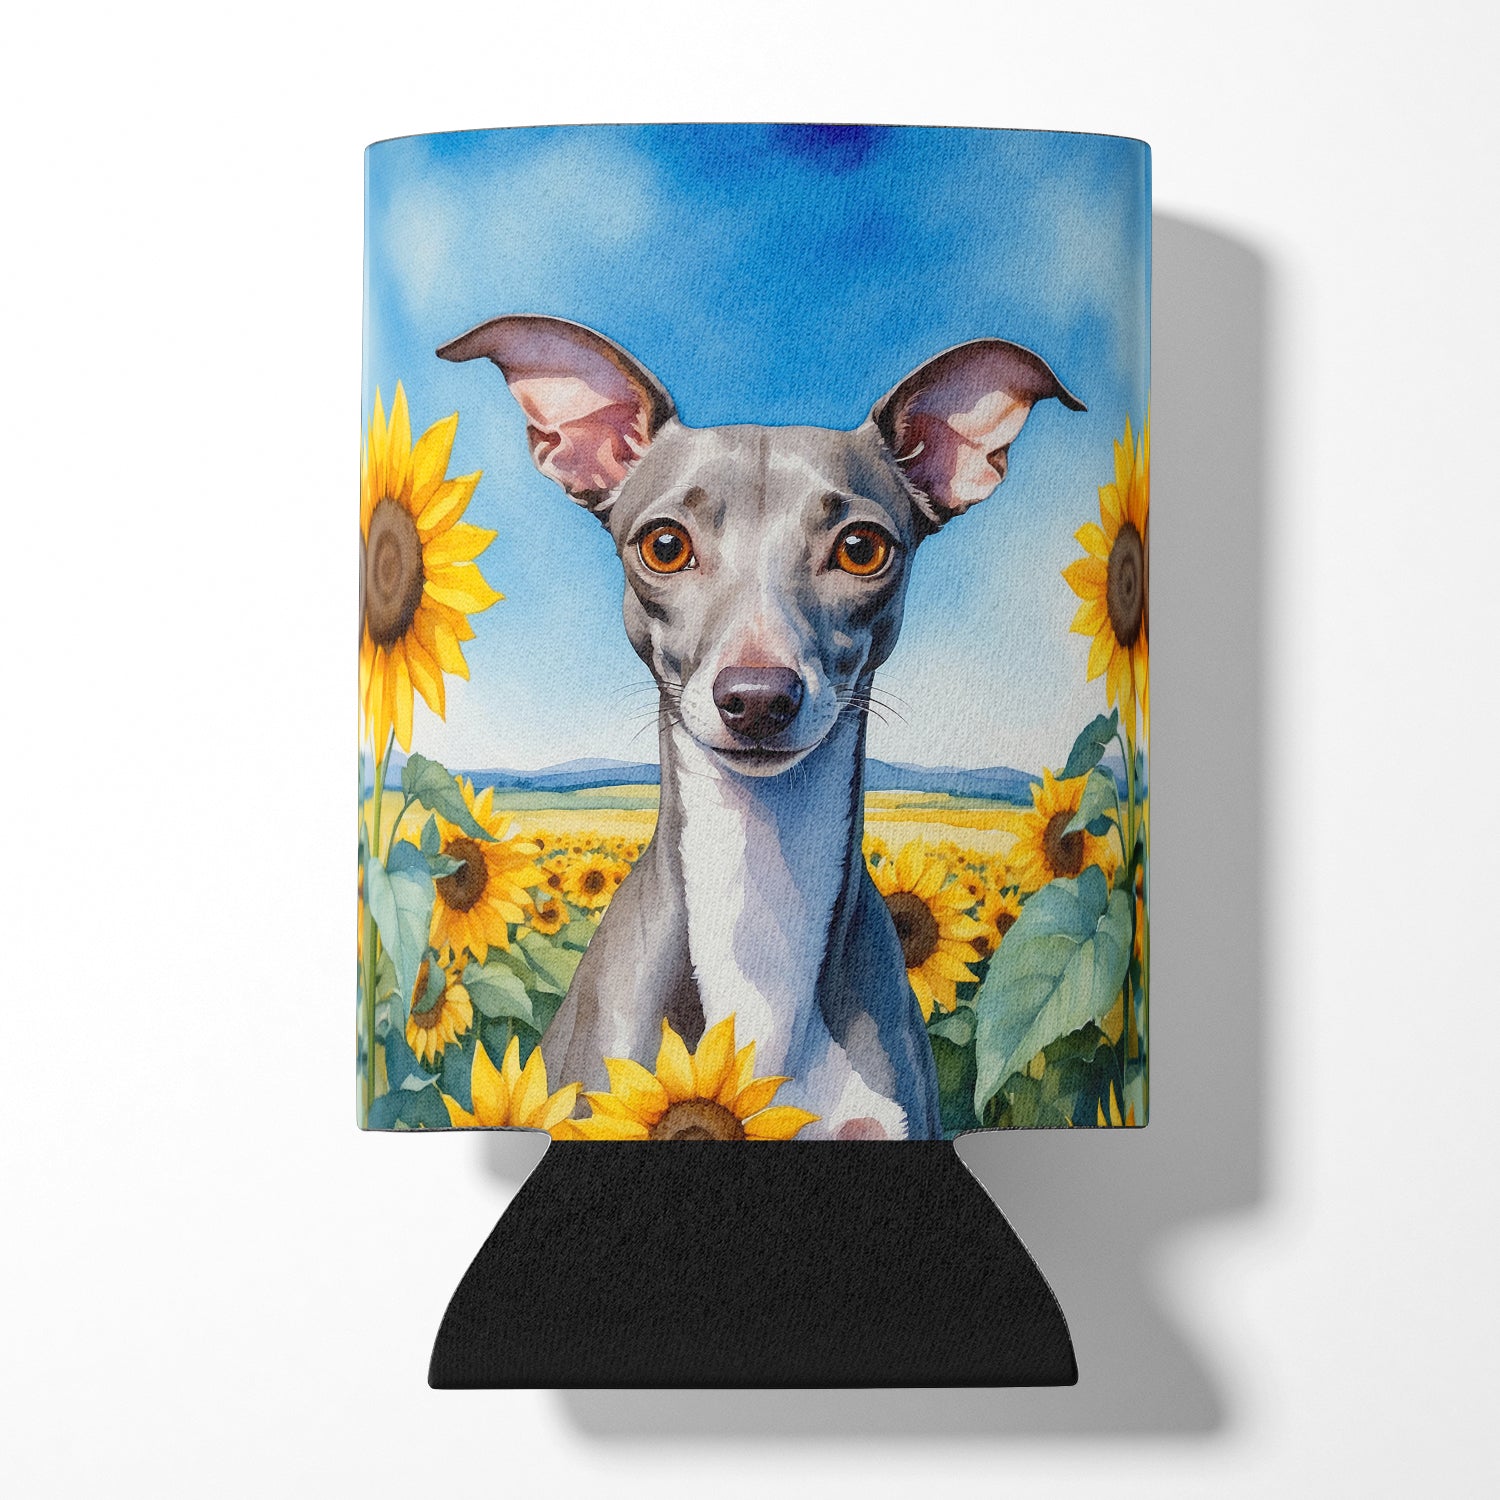 Buy this Italian Greyhound in Sunflowers Can or Bottle Hugger